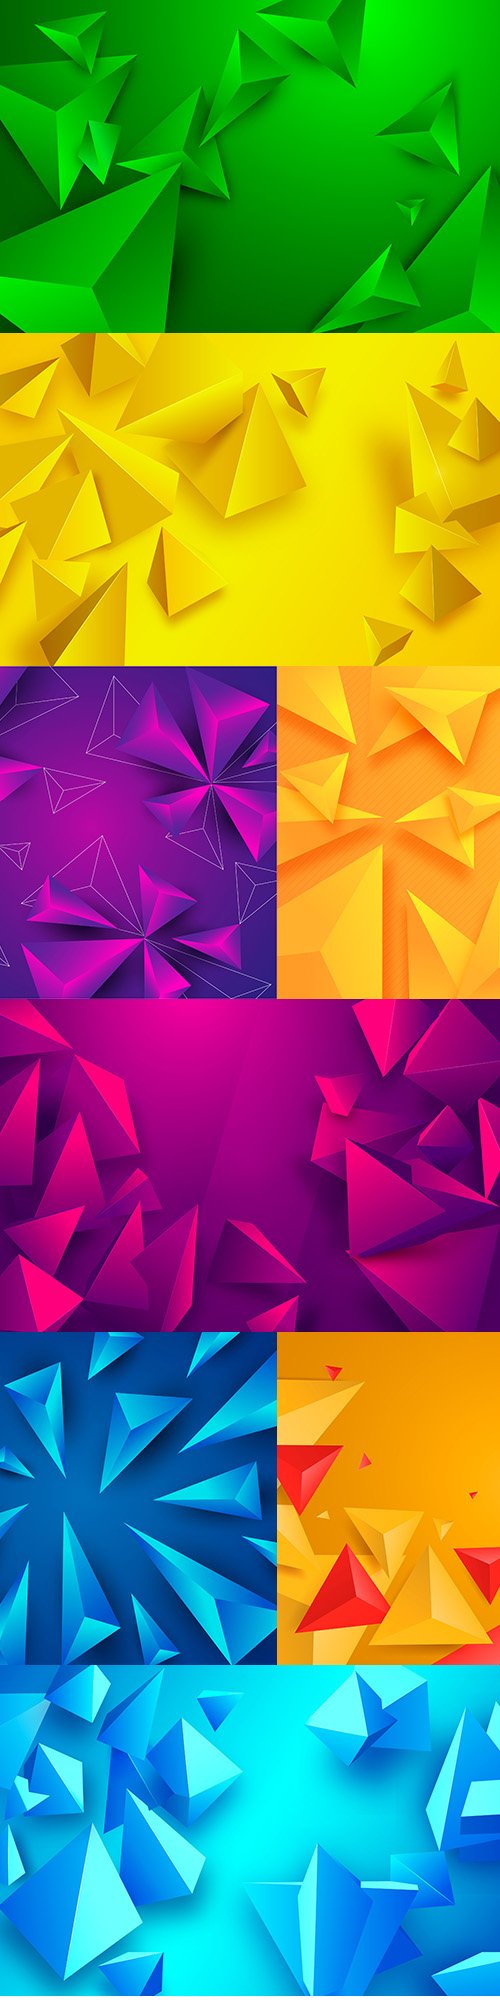 Bright background with triangular figures